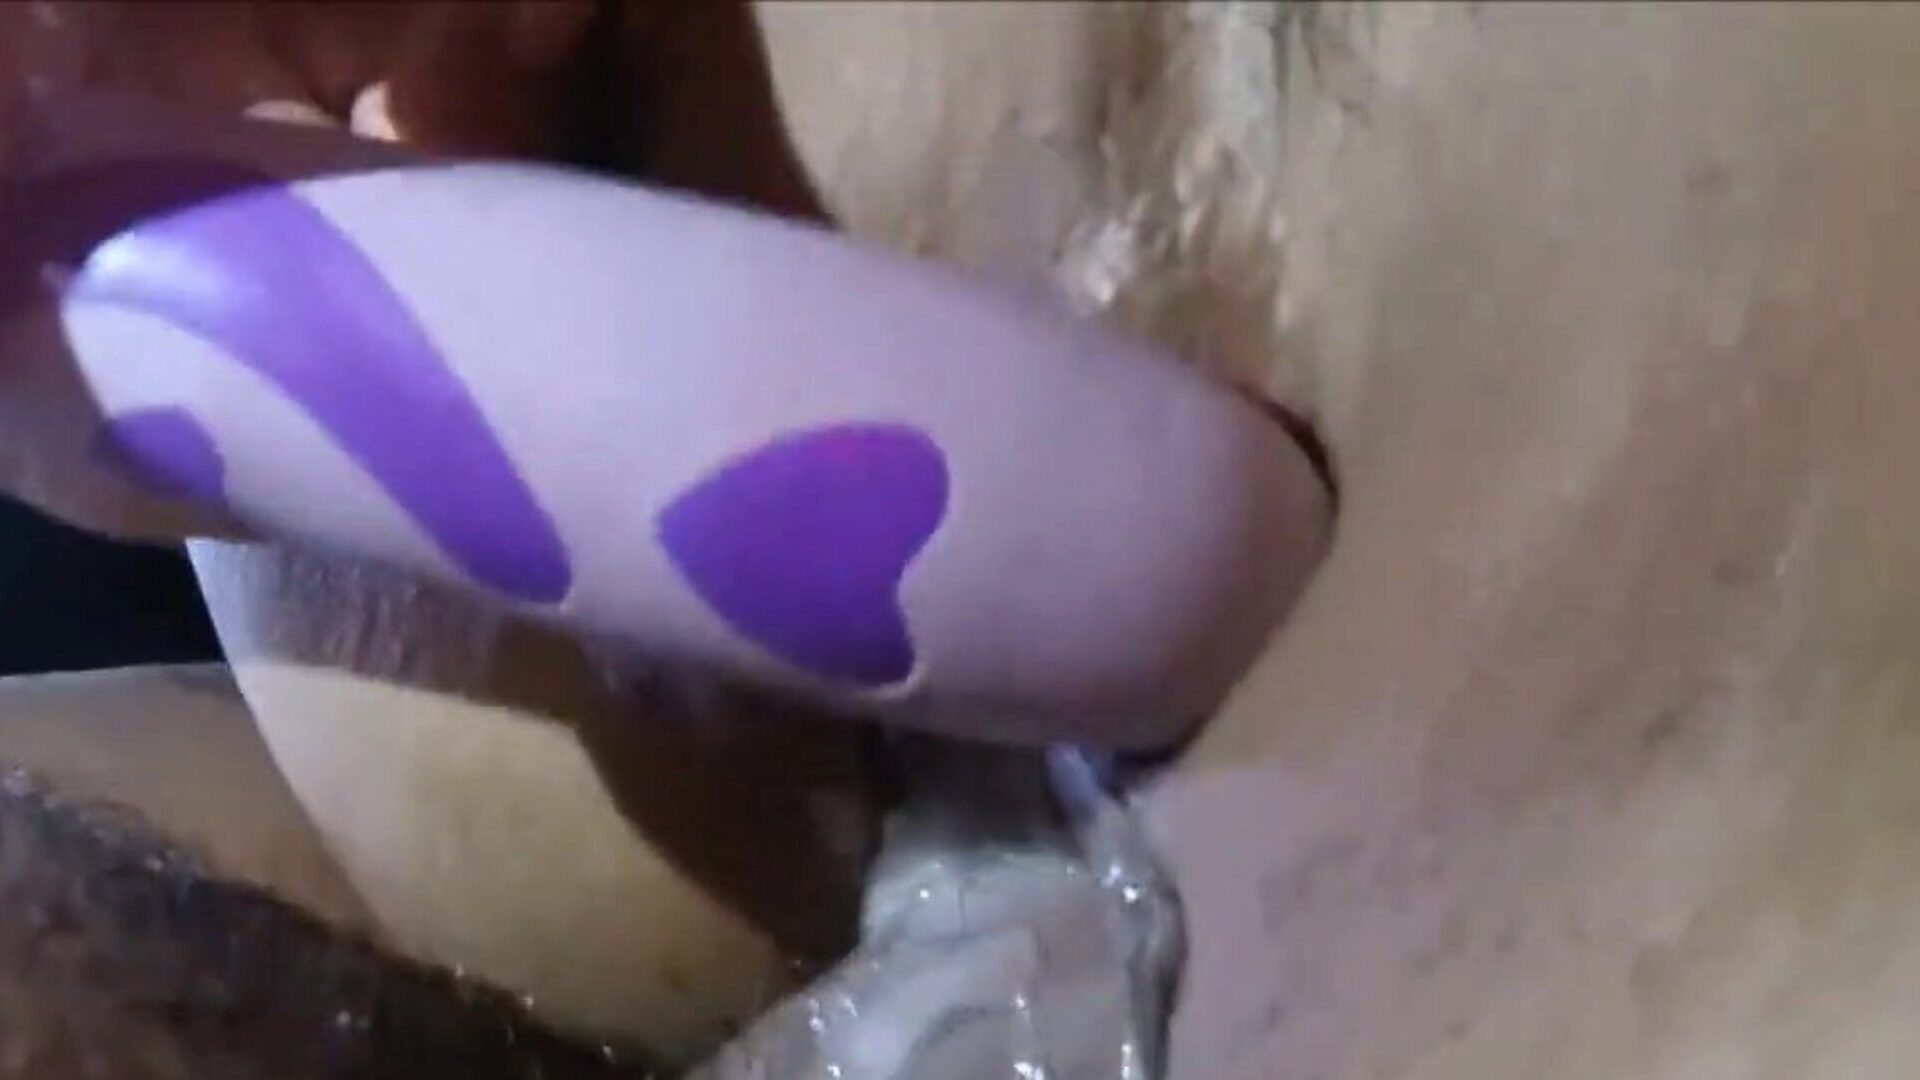 Horny Dude Fucking A Teen Babe While Using A Vibrator To Make Her Squirt This stylish lass has a marvelous looking love tunnel that no fellow on earth can resits. She acquires screwed by his rock hard 10-Pounder and groans to big O as he uses her much loved hookup plaything in her splooging pussy